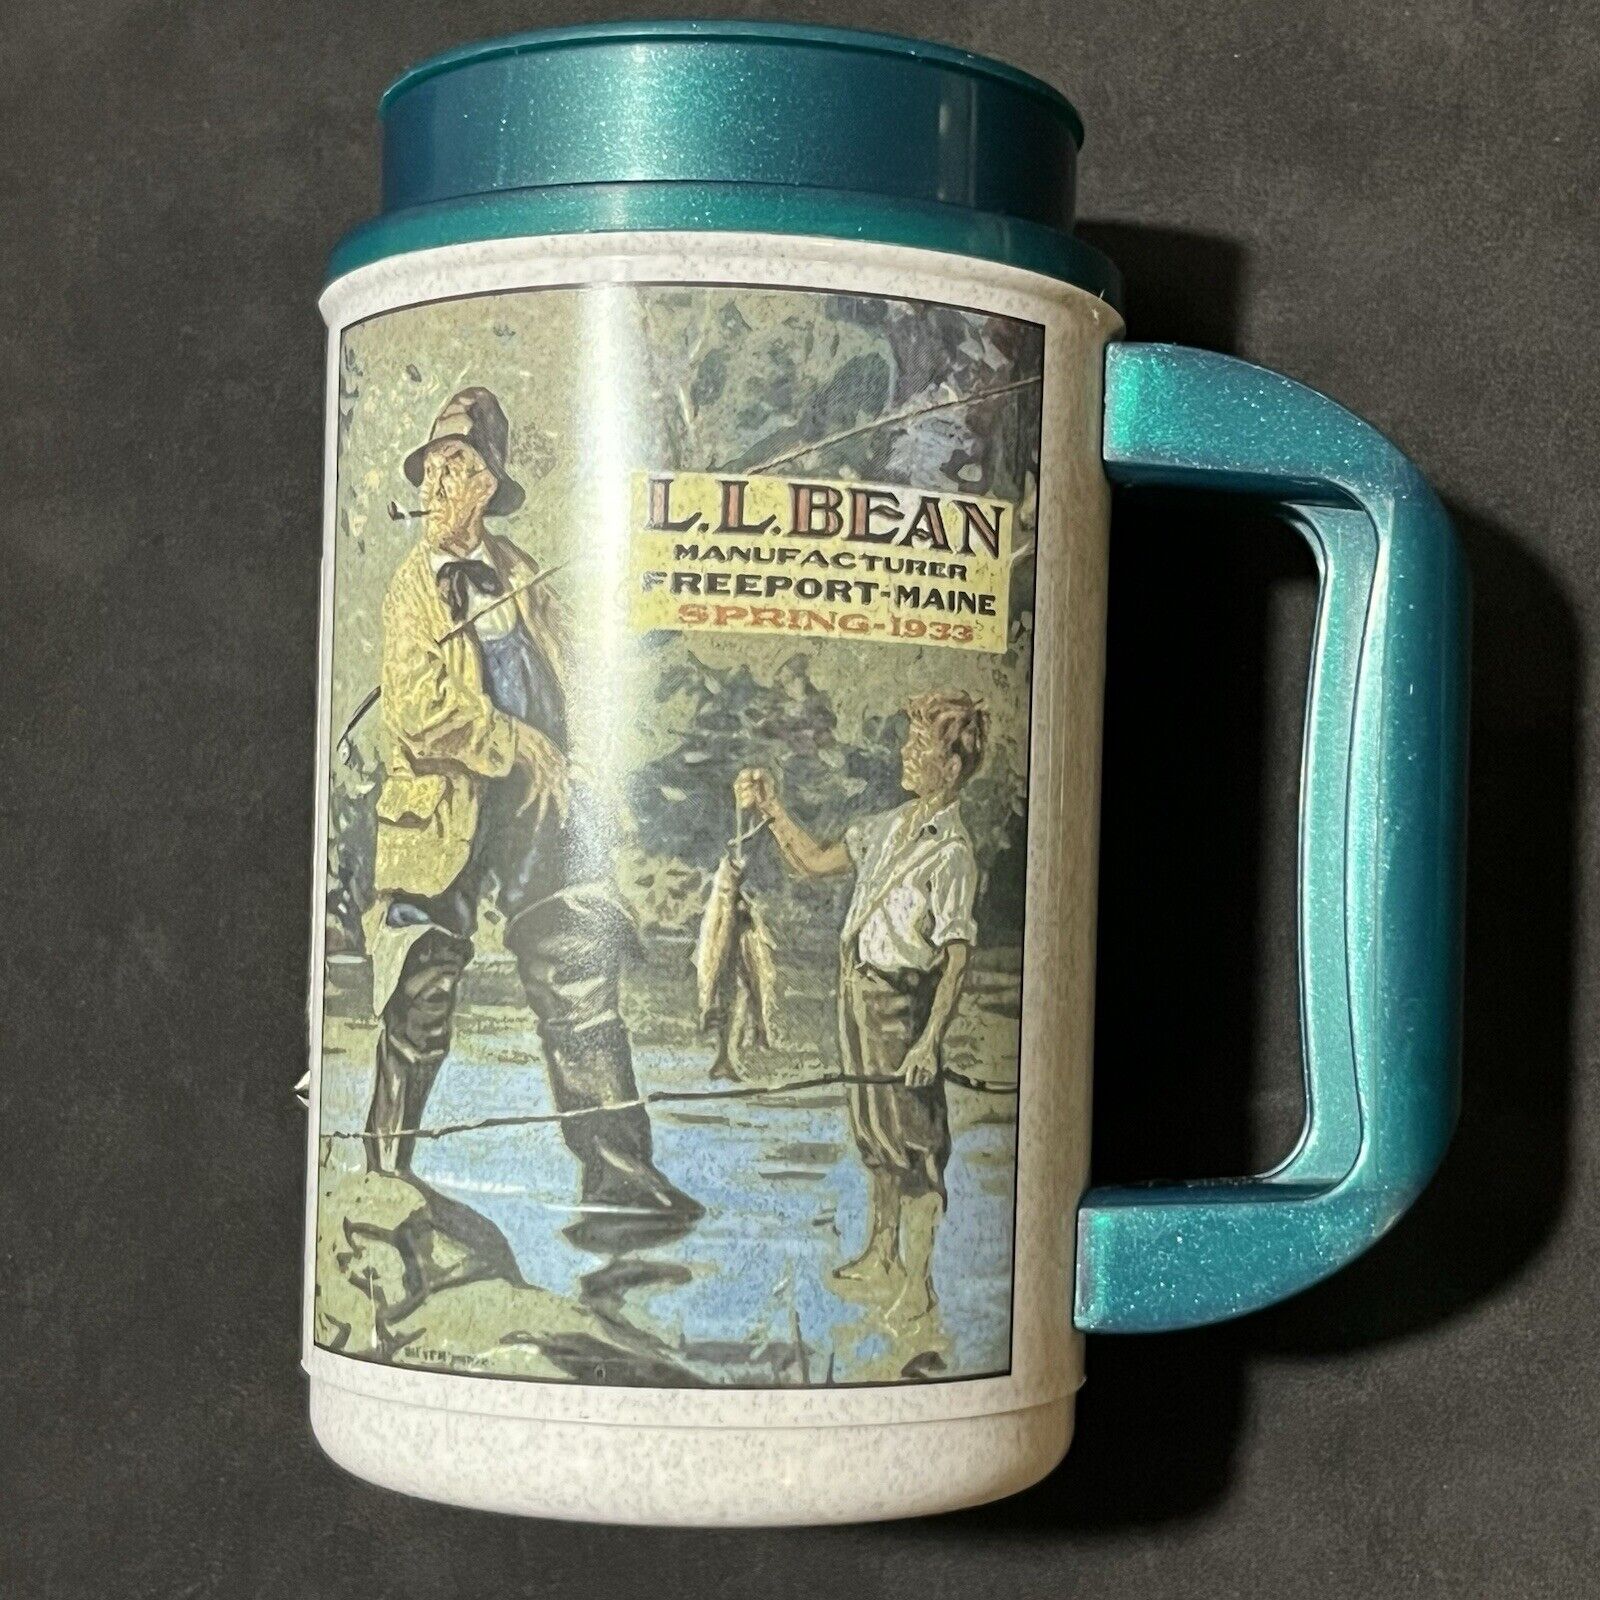 Vintage LL BEAN Plastic Travel Coffee Mug Cups 2 Sided Whirley Made in USA 1970s